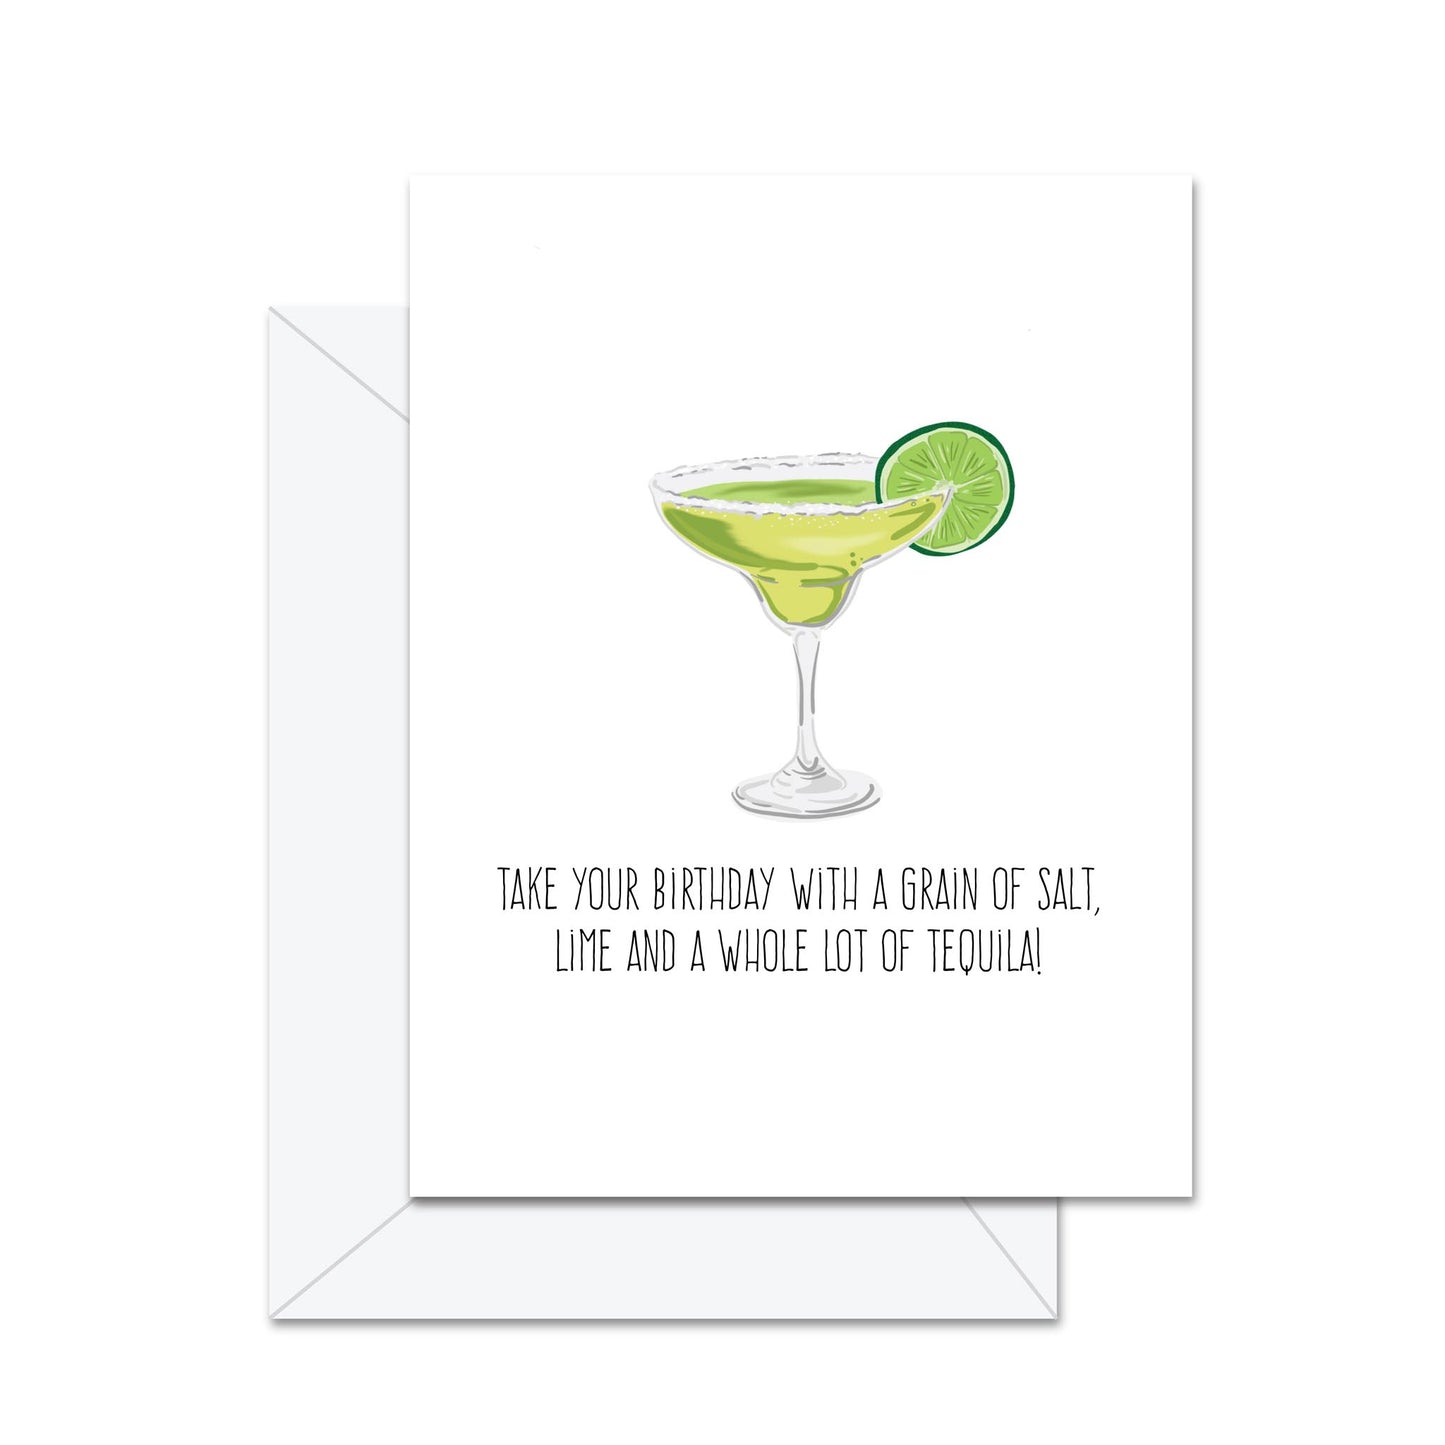 Take Your Birthday With A Grain Of Salt, Lime And A Whole Lot Of Tequila - Greeting Card